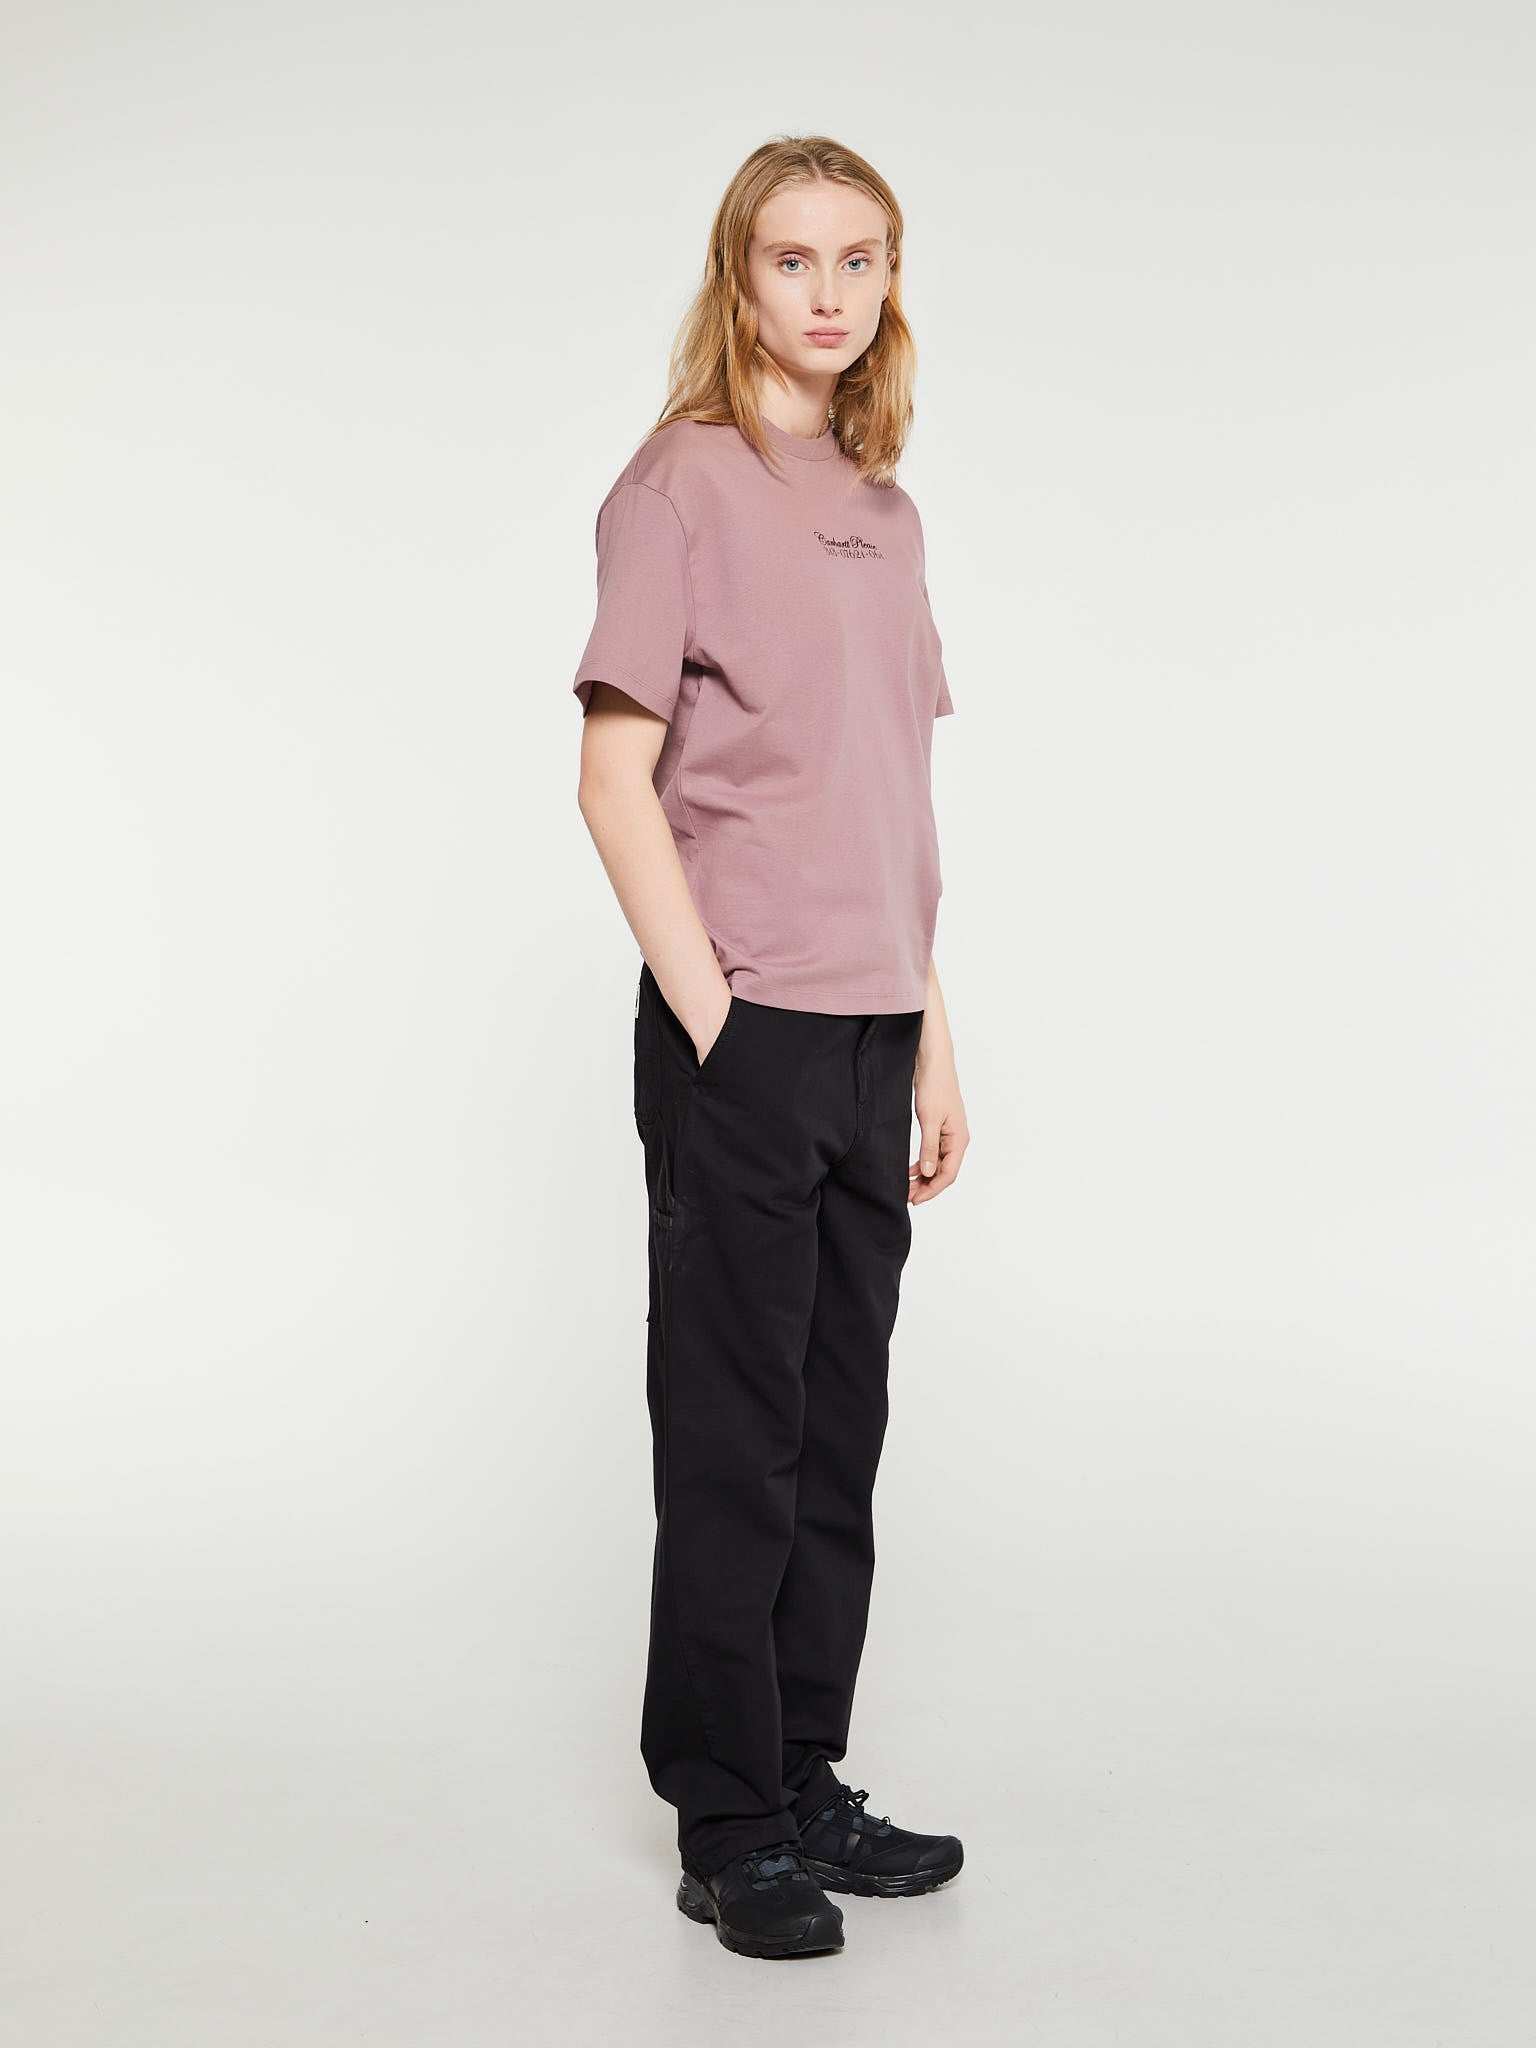 Women's Carhartt Please T-Shirt in Daphne and Black